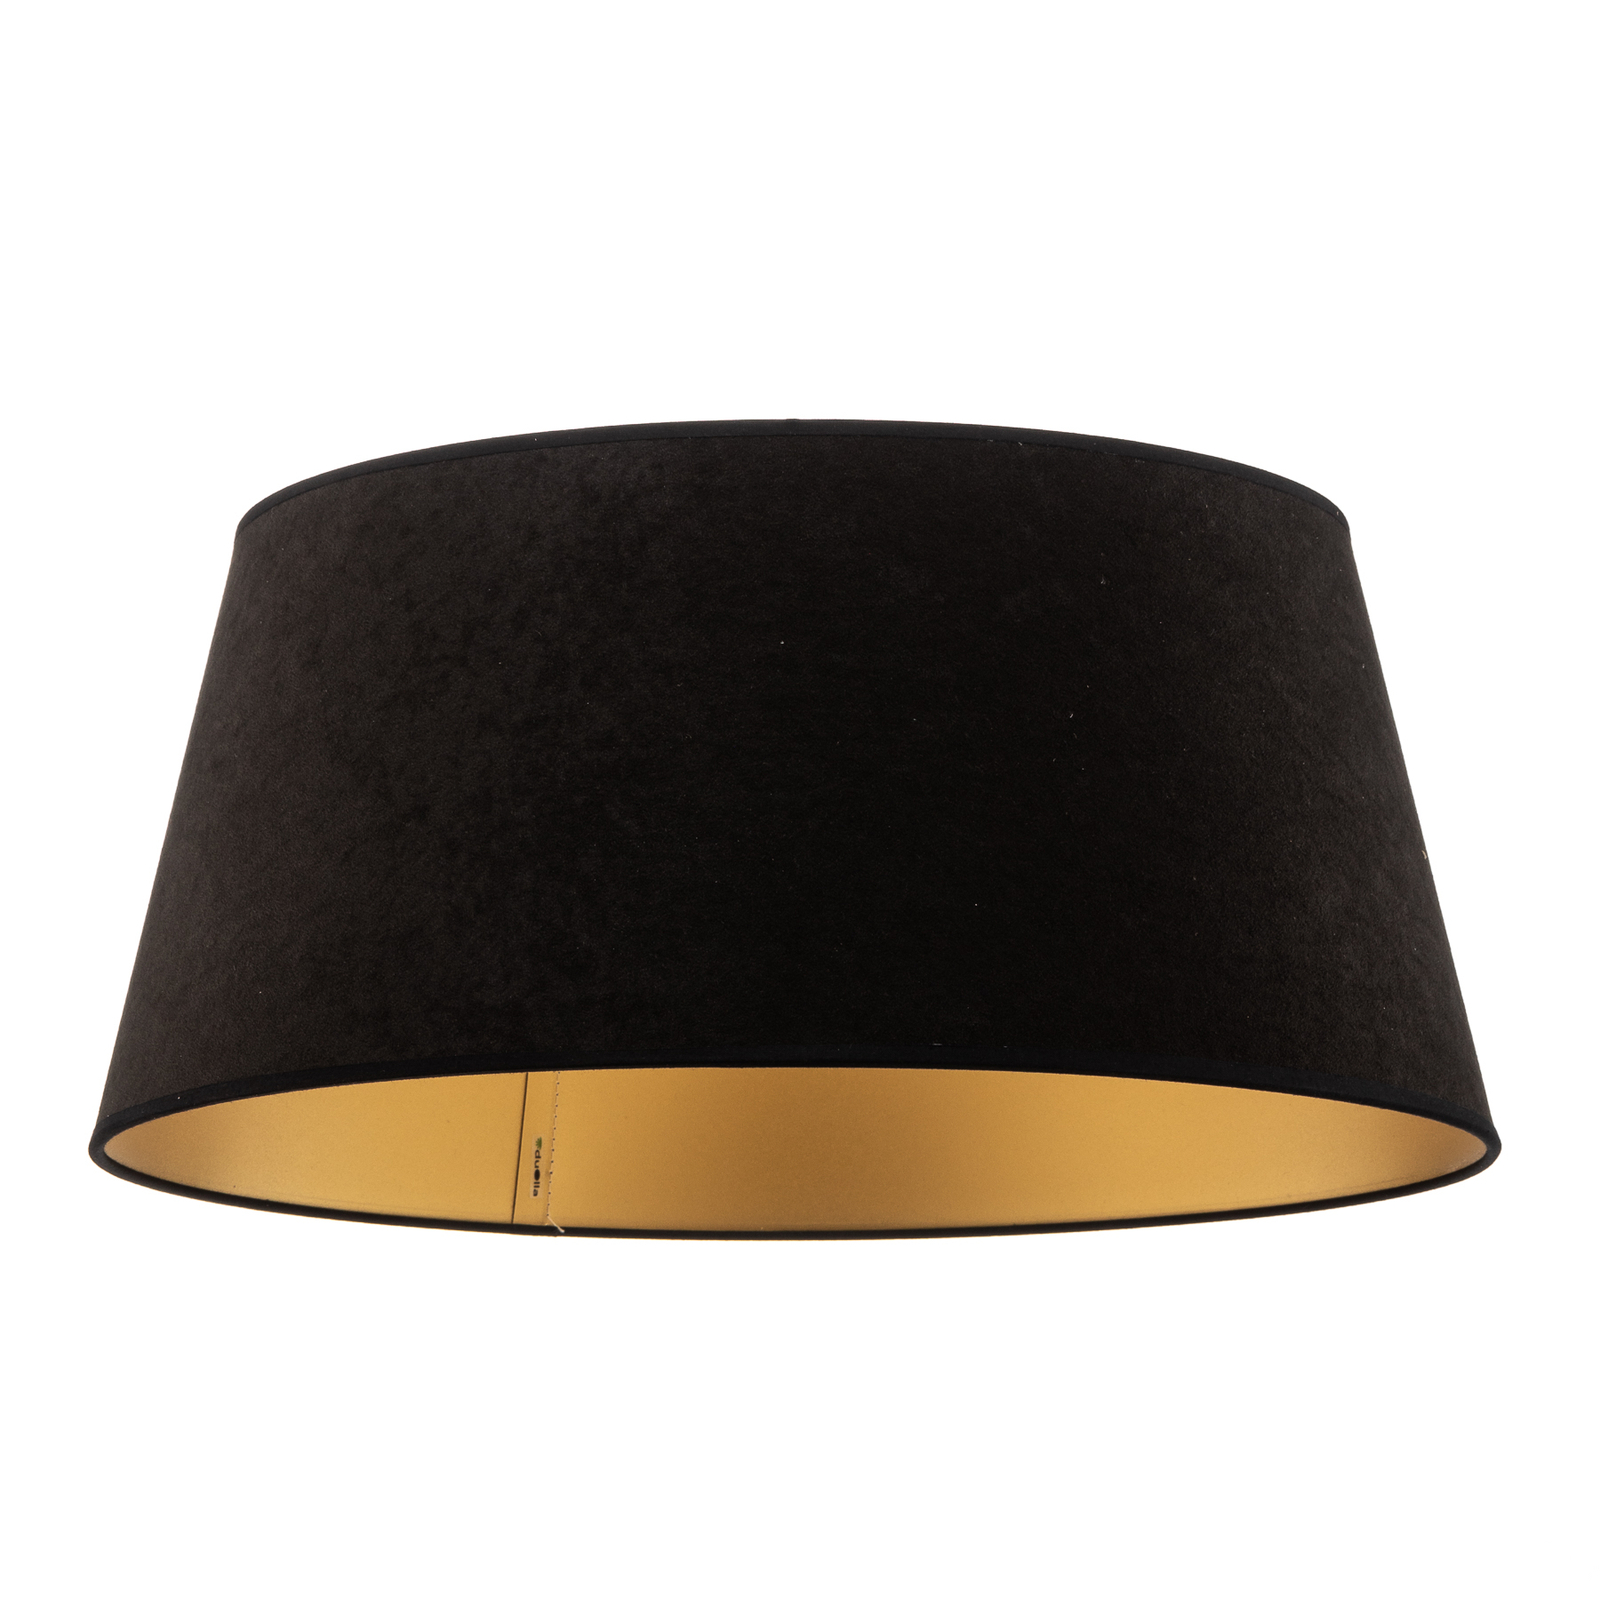 Cone lampshade height 22.5 cm, black/gold